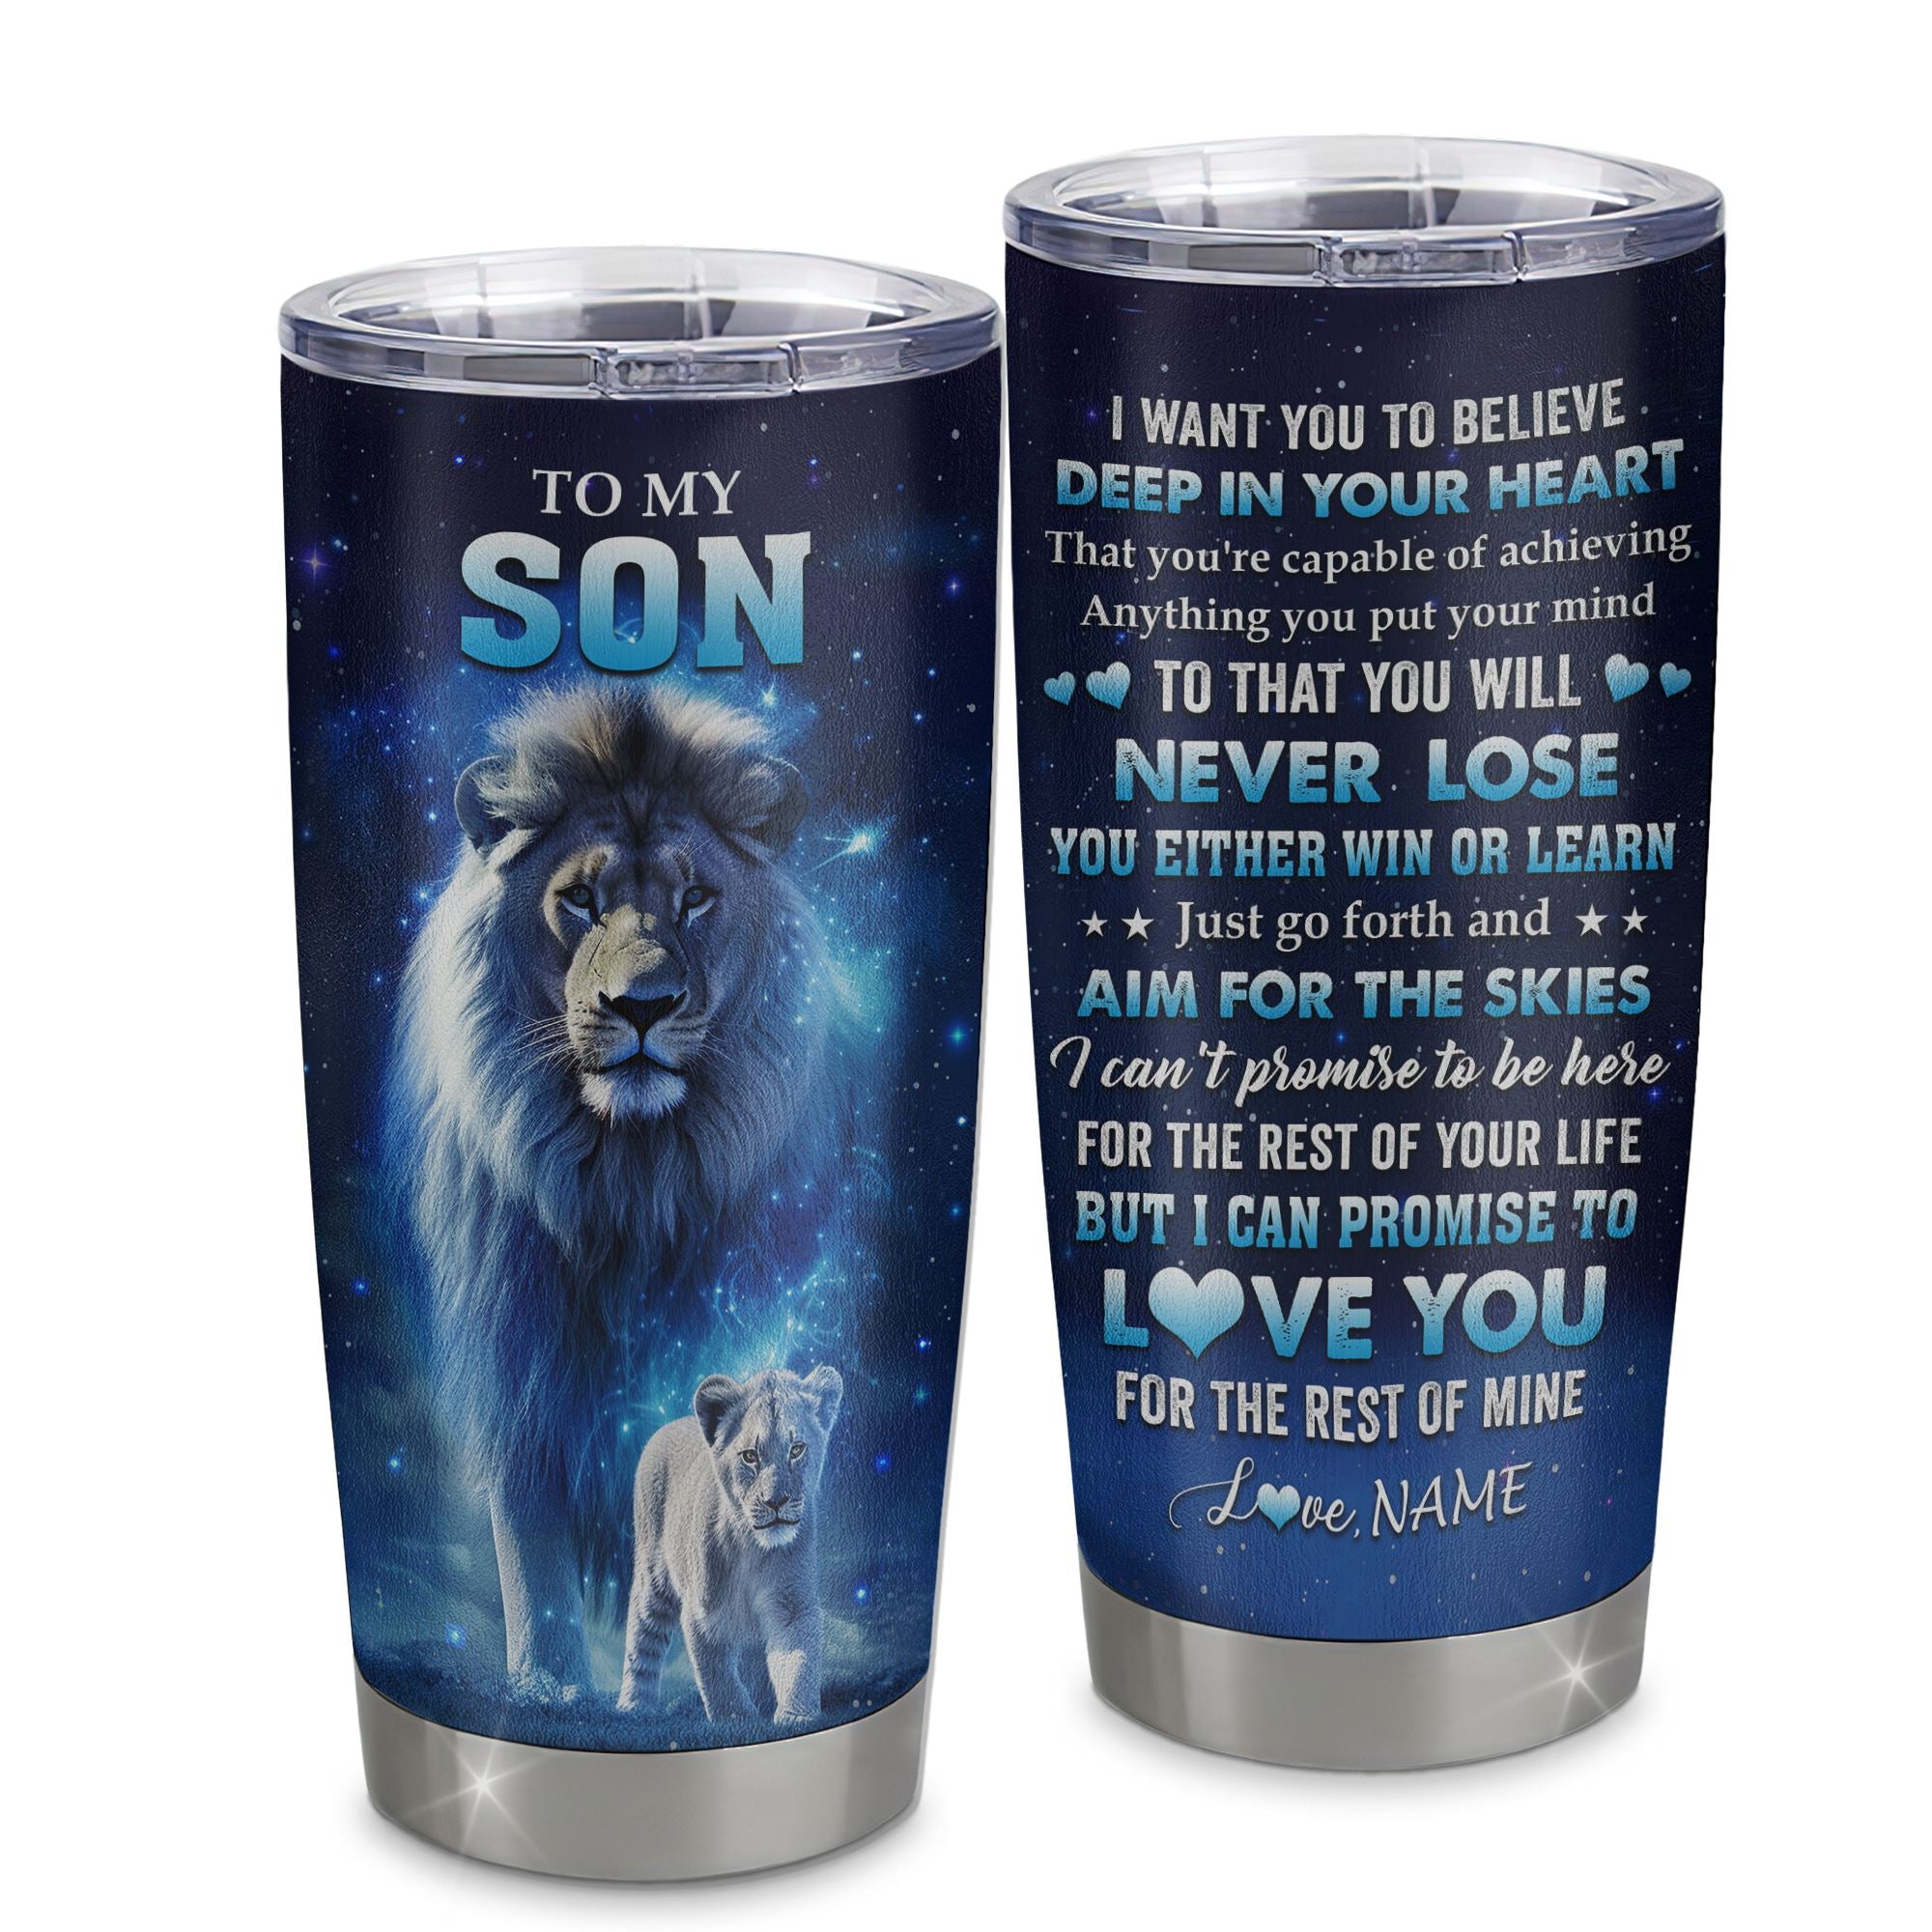 Personalized_To_My_Son_Lion_From_Mom_Dad_Mother_Father_Tumbler_Stainless_Steel_Cup_Believe_Your_Heart_Son_Gift_Birthday_Graduation_Christmas_Custom_Travel_Mug_Tumbler_mockup_1.jpg